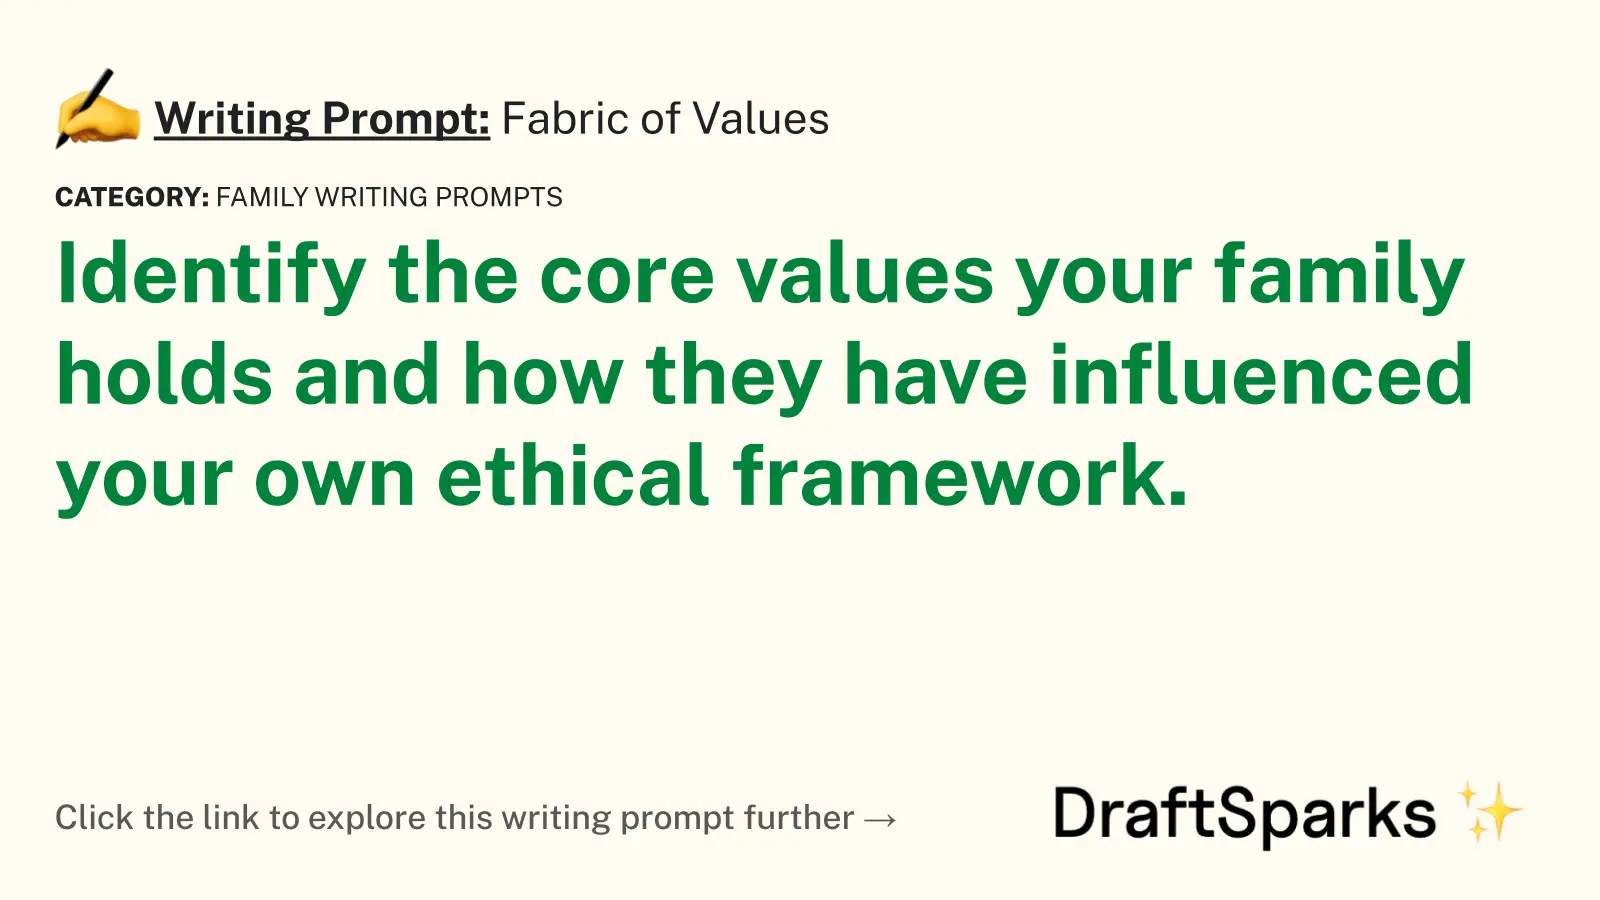 Fabric of Values